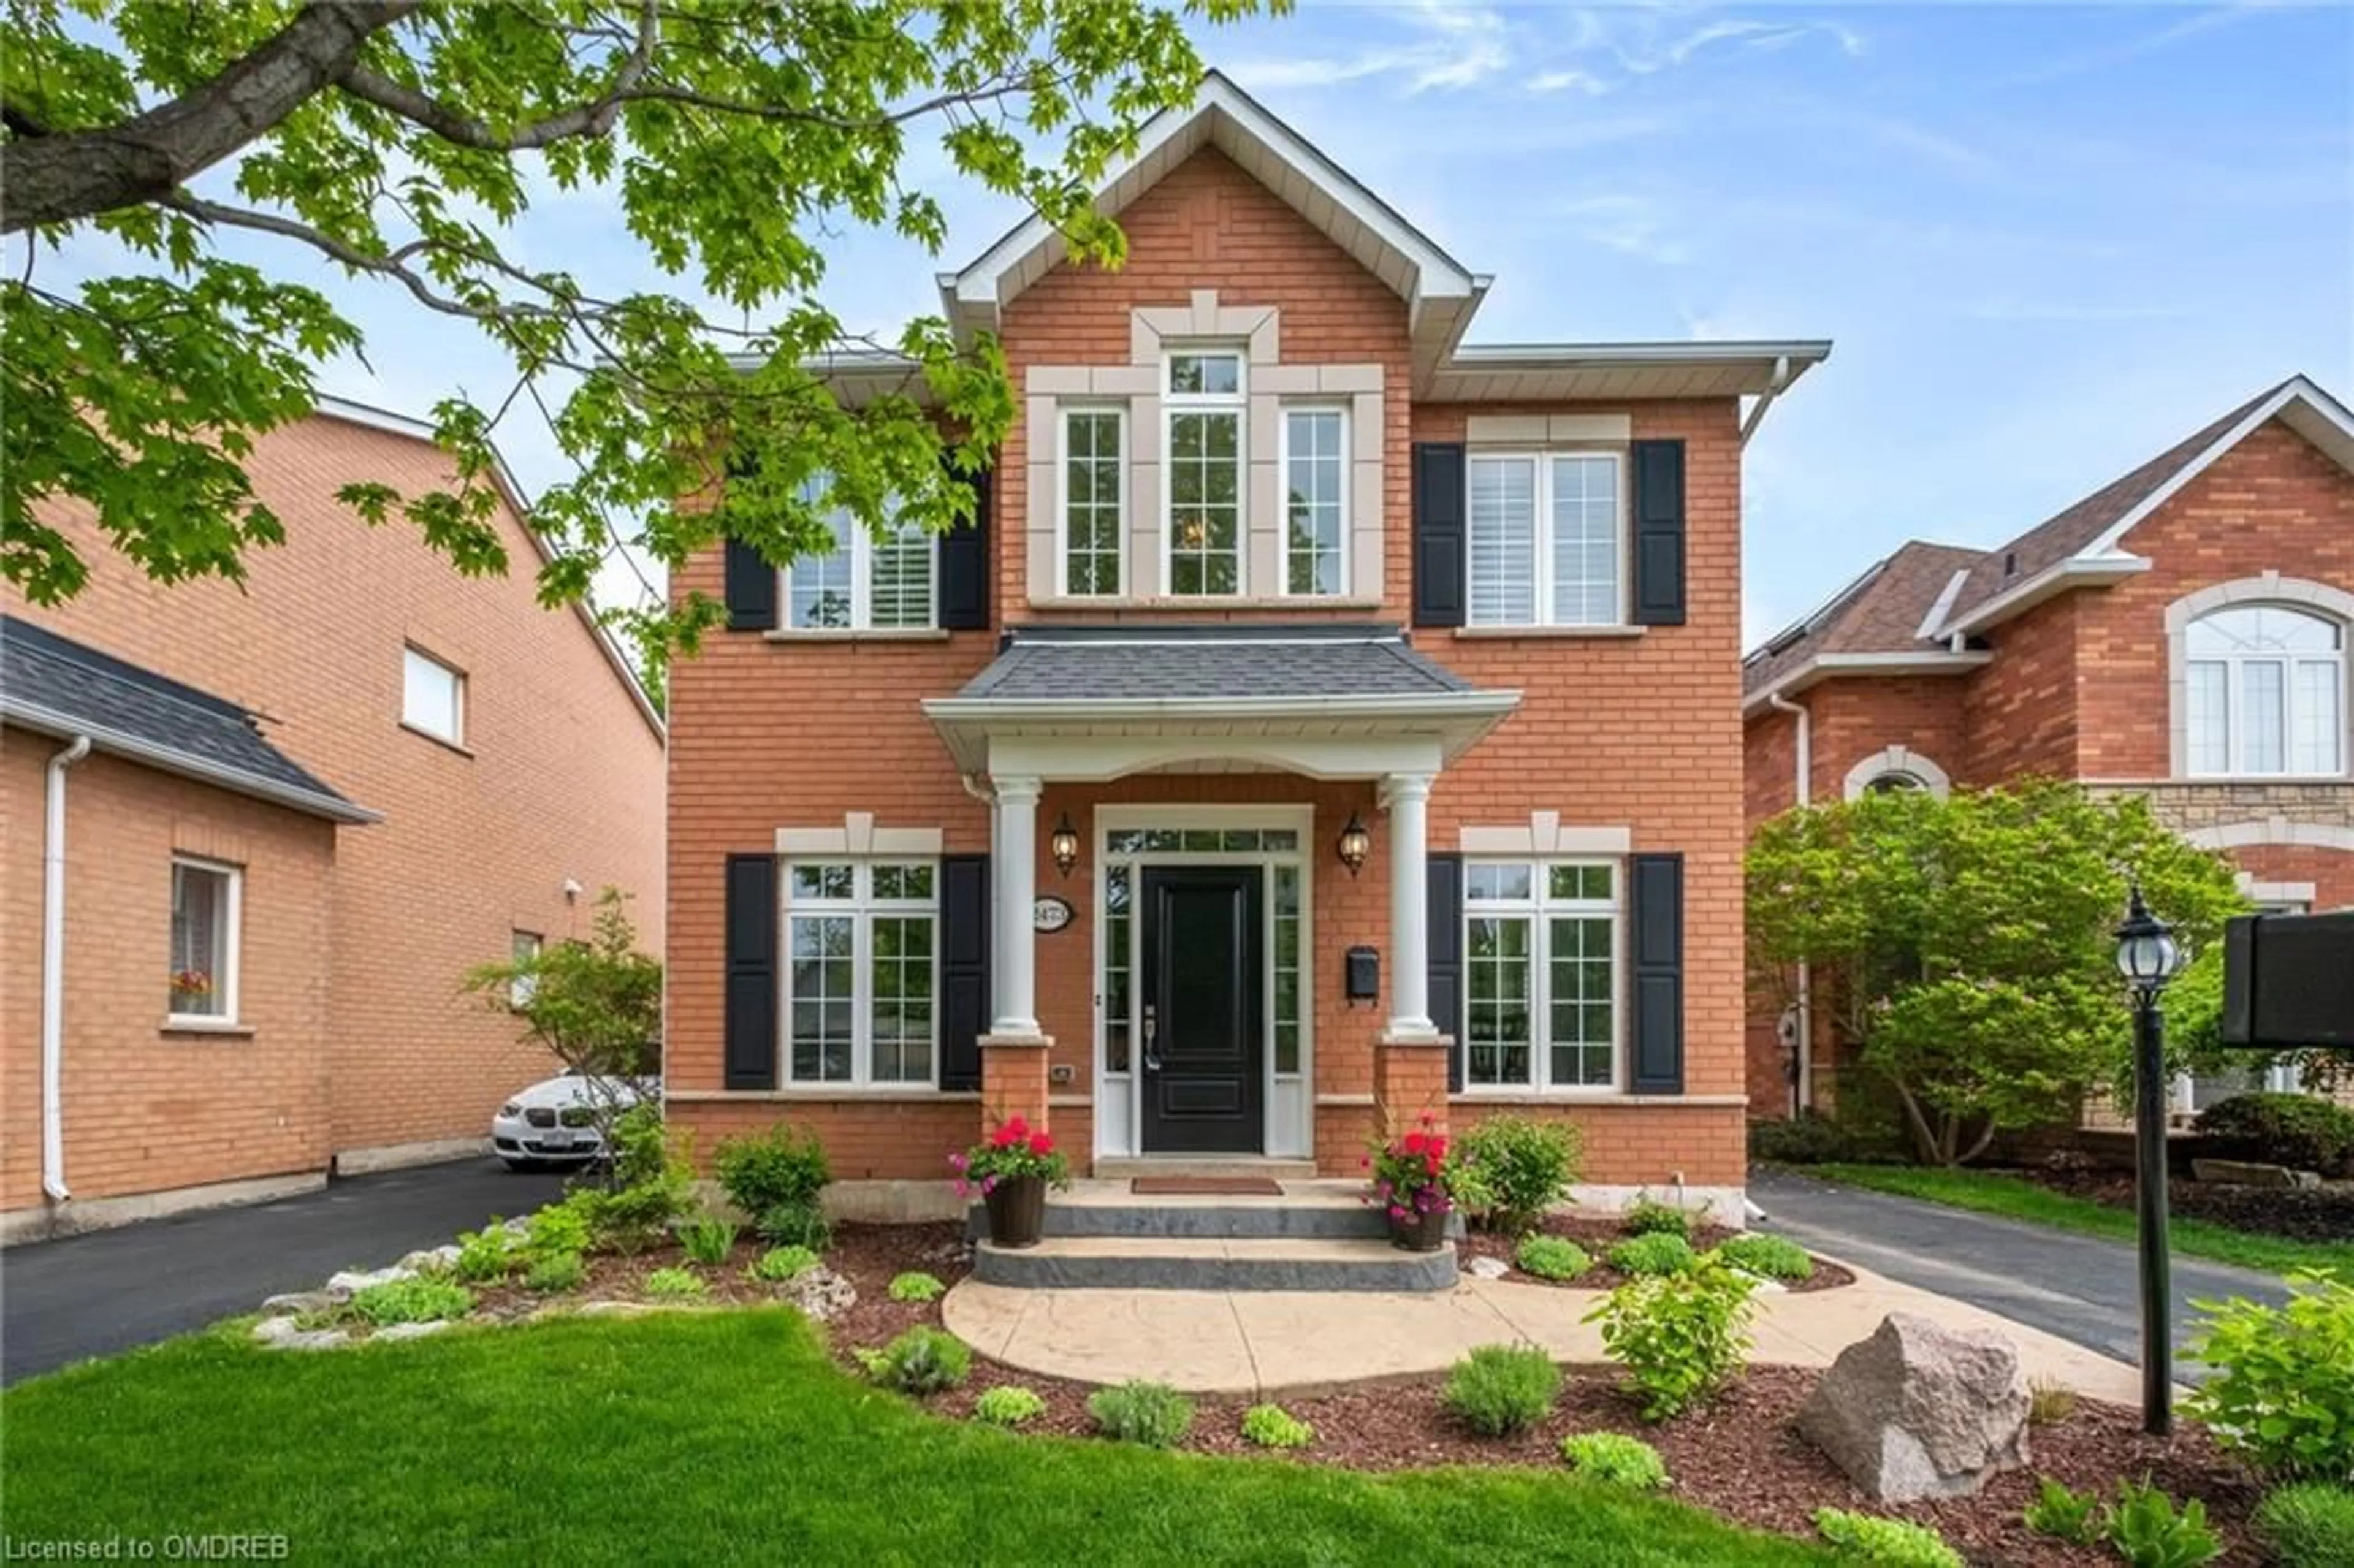 Home with brick exterior material for 2473 Capilano Cres, Oakville Ontario L6H 6L3